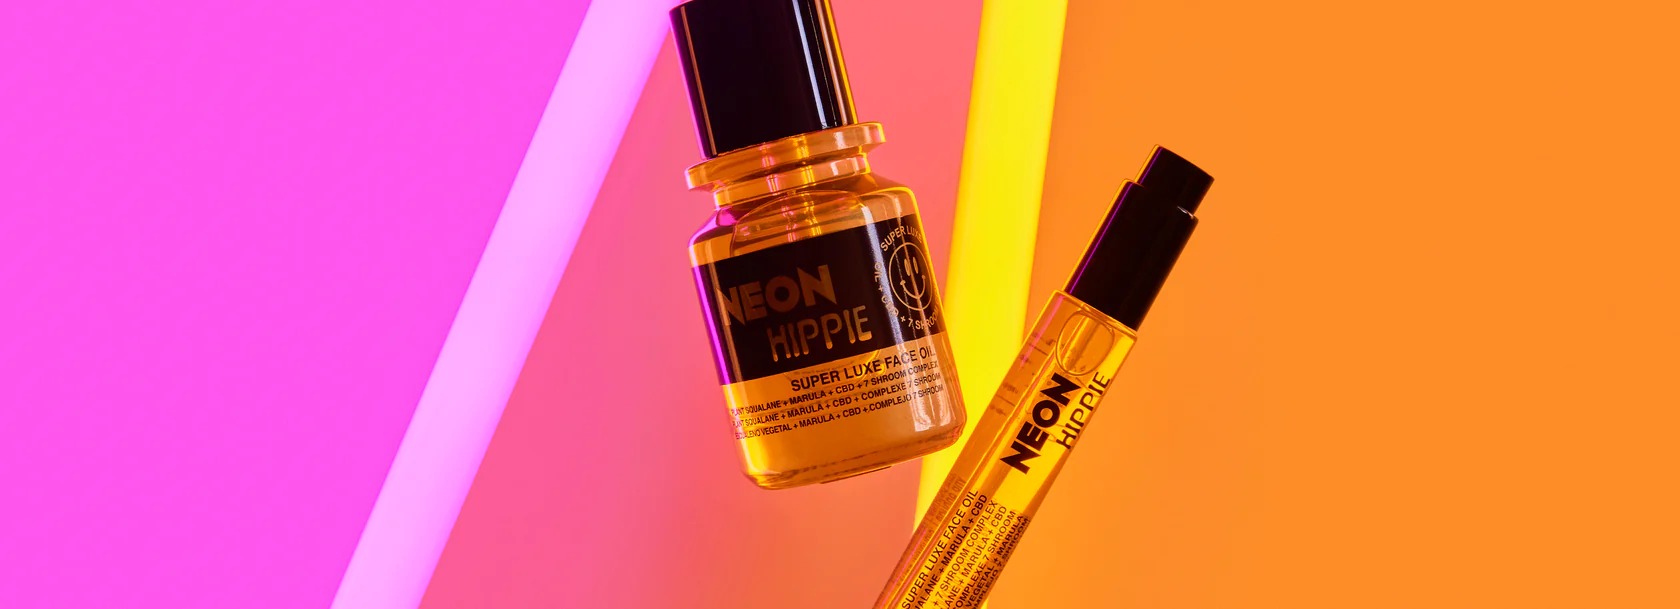 Neon Hippie Launches Mushroom-Based Skincare Collection: Shop The Collection